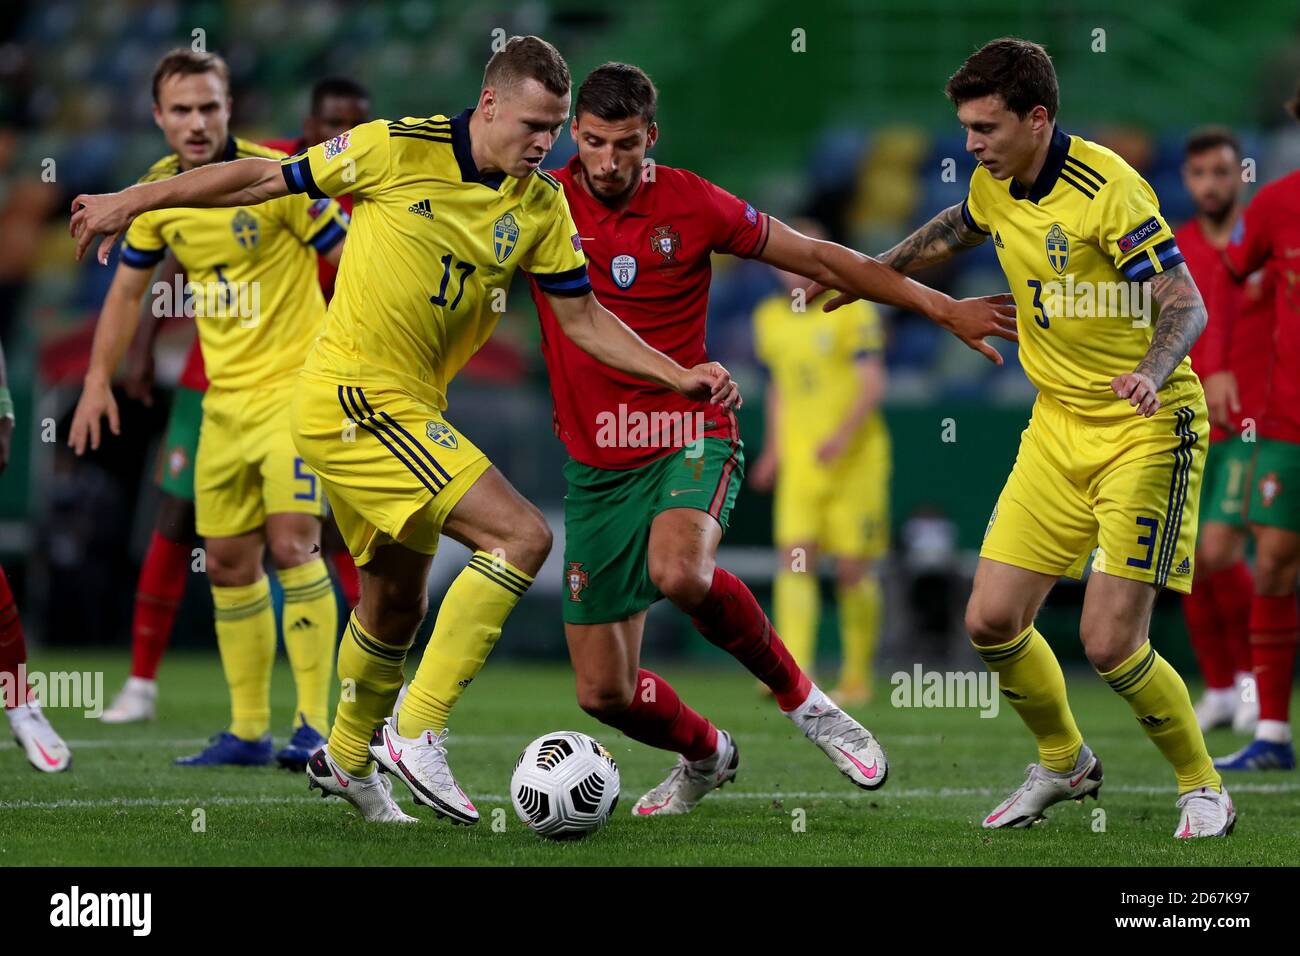 Lisbon, Portugal. 14th Oct, 2020. Viktor Claesson (front L) of Sweden vies with Ruben Dias (C) of Portugal during their UEFA Nations League football match in Lisbon, Portugal, on Oct. 14, 2020. Credit: Pedro Fiuza/Xinhua/Alamy Live News Stock Photo